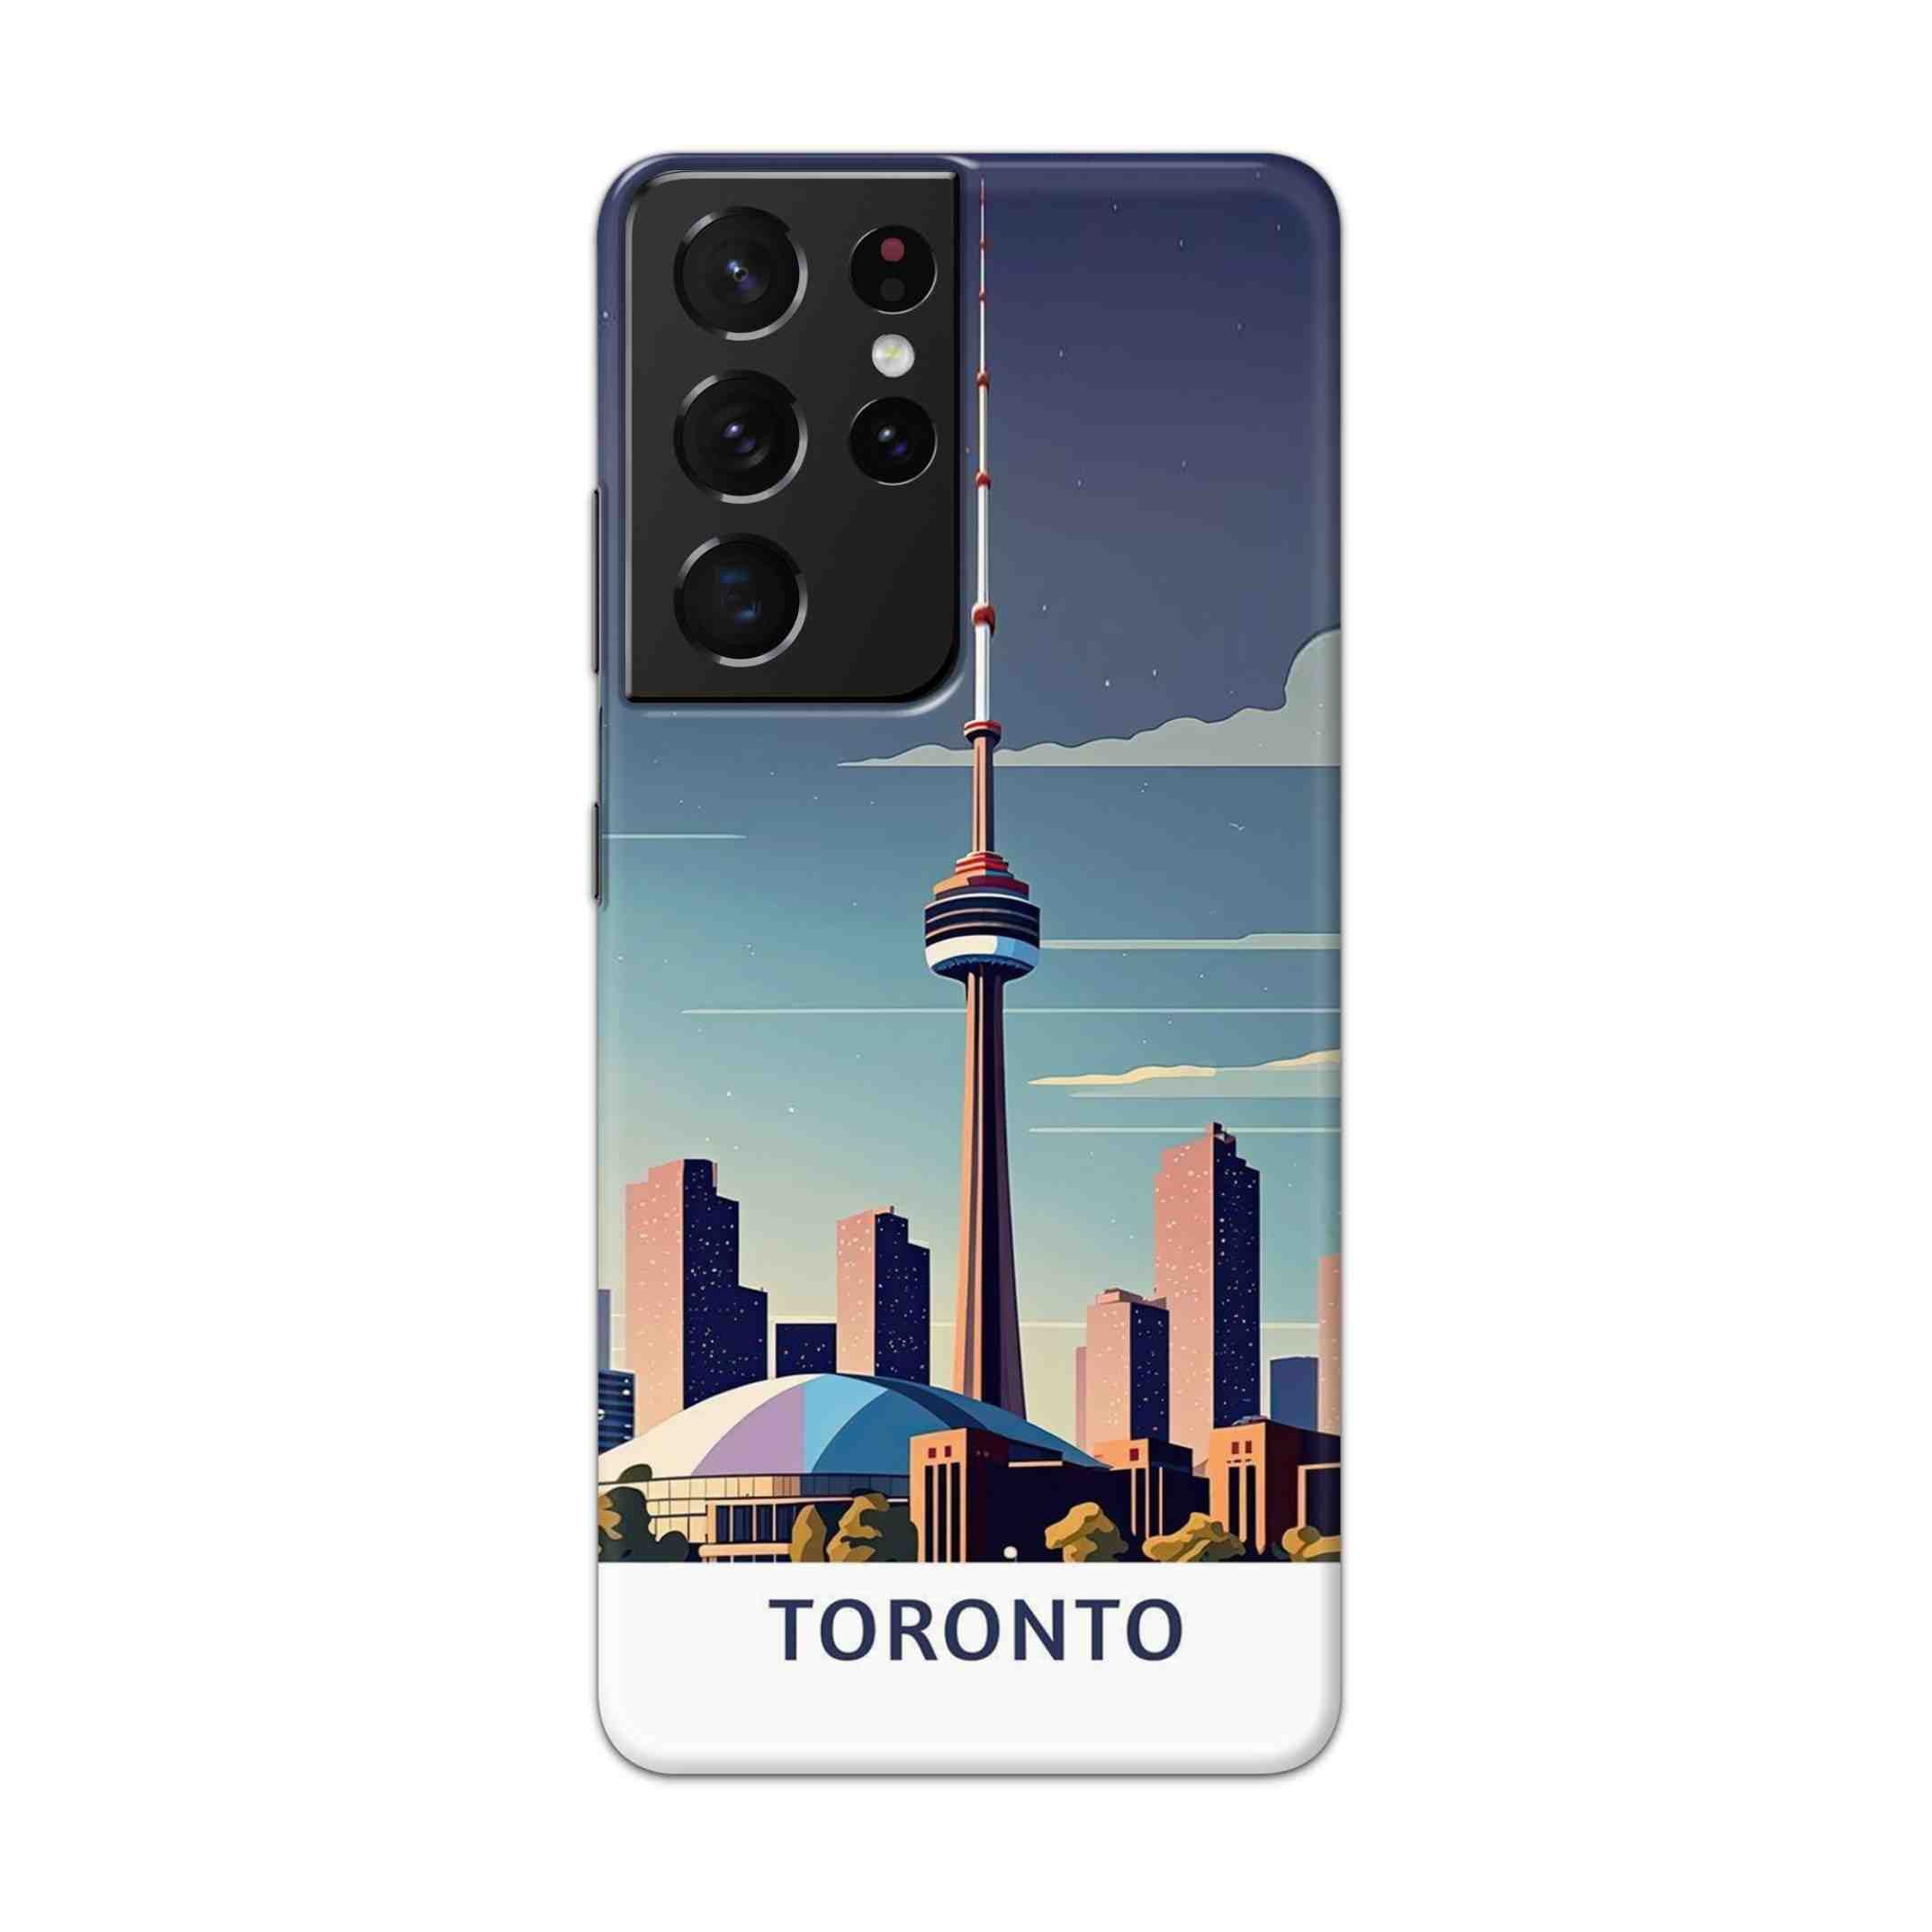 Buy Toronto Hard Back Mobile Phone Case Cover For Samsung Galaxy S21 Ultra Online